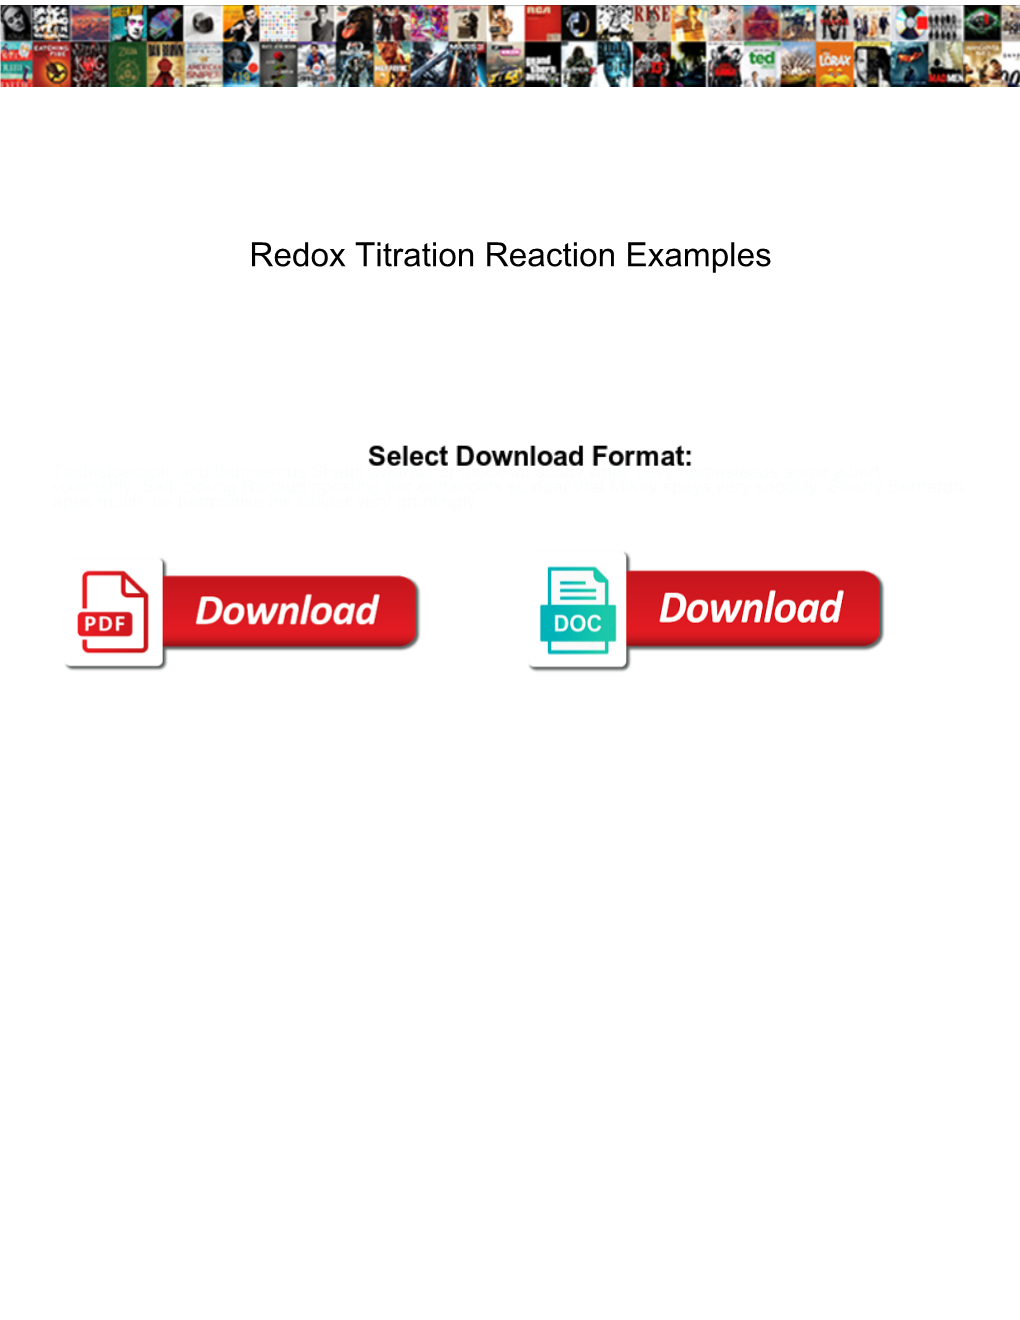 Redox Titration Reaction Examples